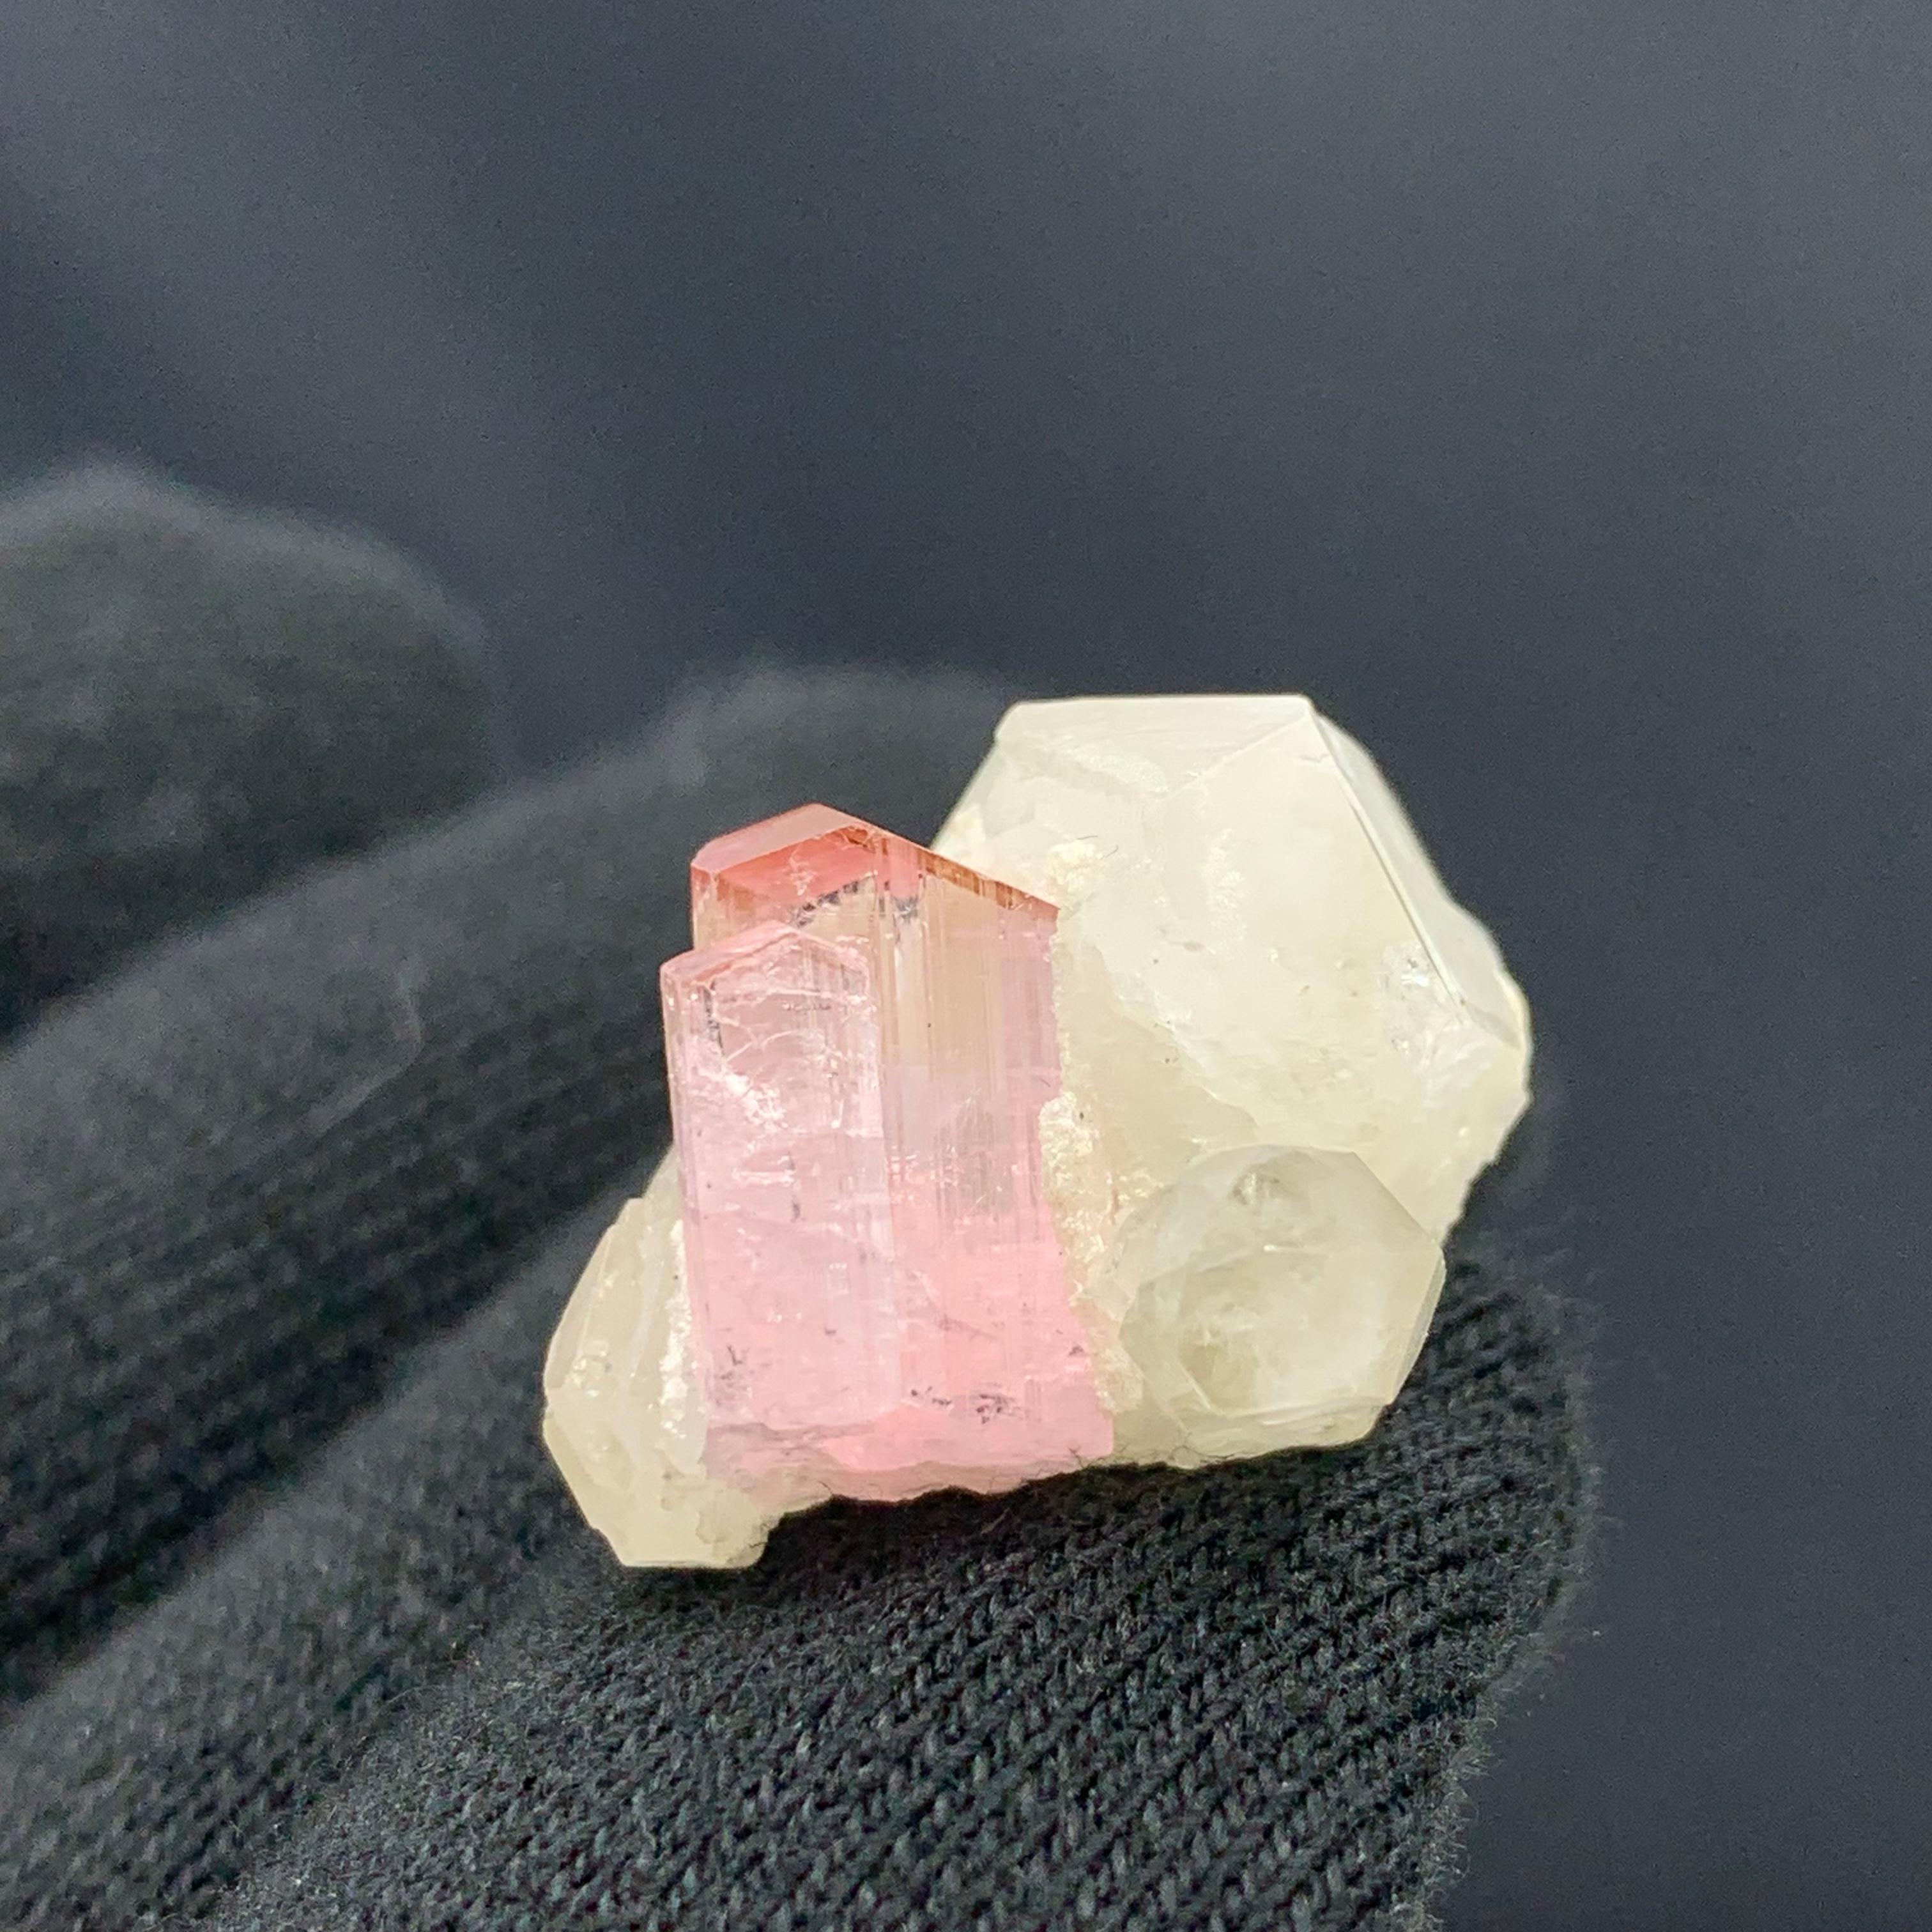 35 Carat Cute Pink Tourmaline Specimen With Quartz From Kunar, Afghanistan  For Sale 3